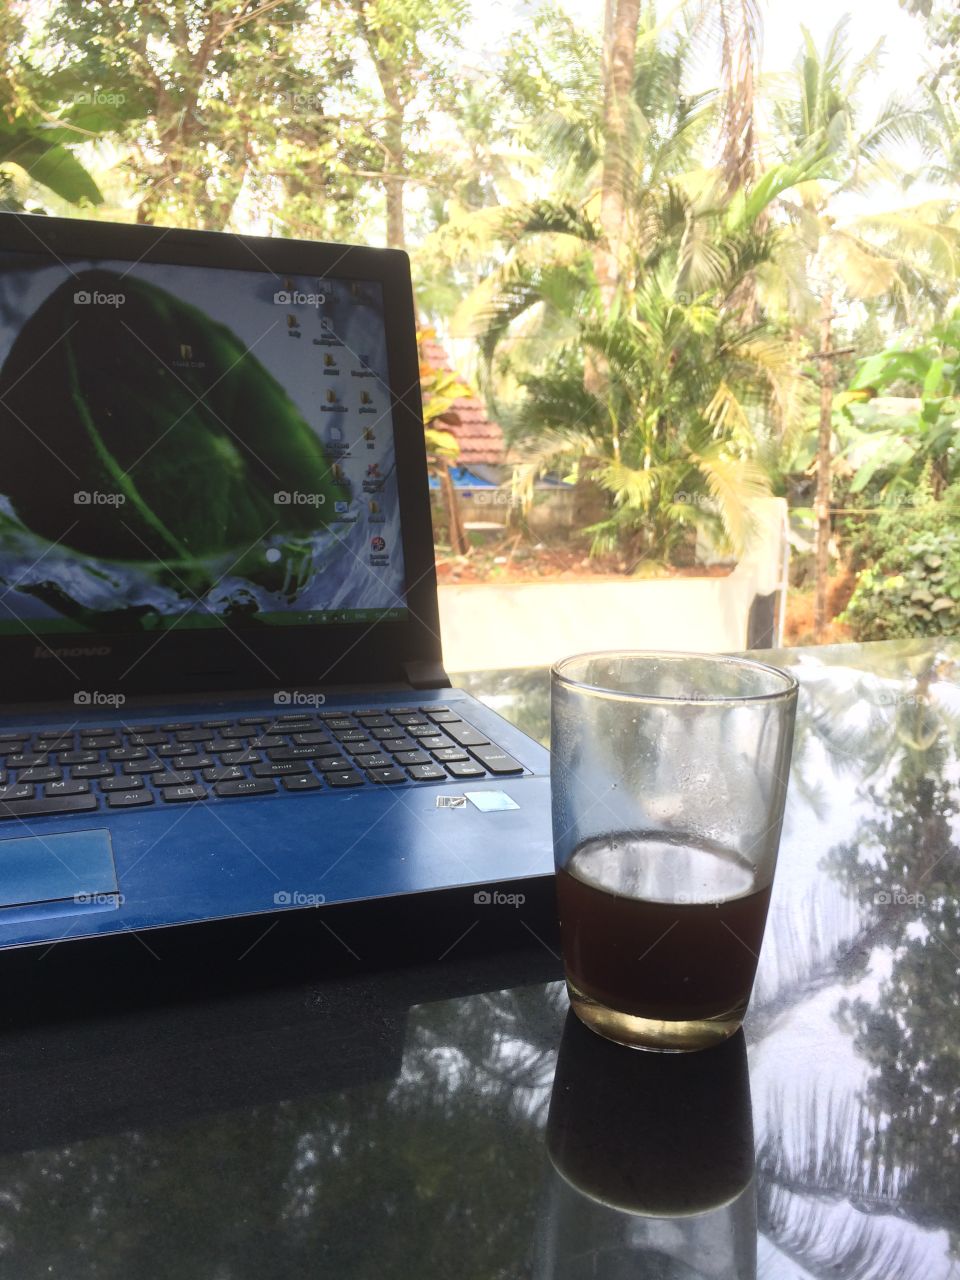 Laptop & a glass which is very cool to look outside with a cup of tea